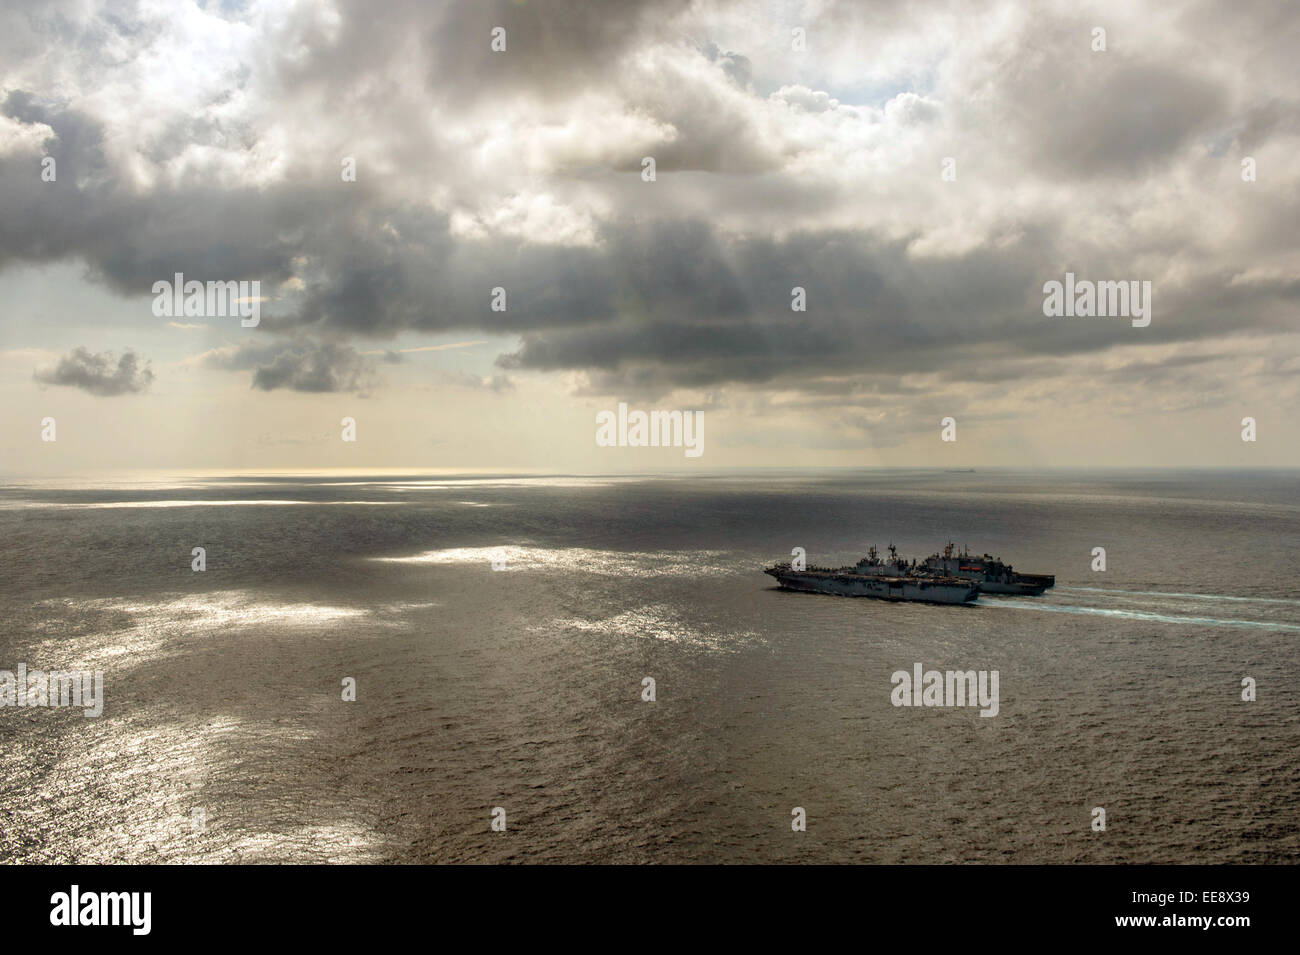 US Navy amphibious assault ship USS Makin Island and the amphibious dock landing ship USS Comstock during operations on a cloudy day January 14, 2015 in the Andaman Sea. Stock Photo